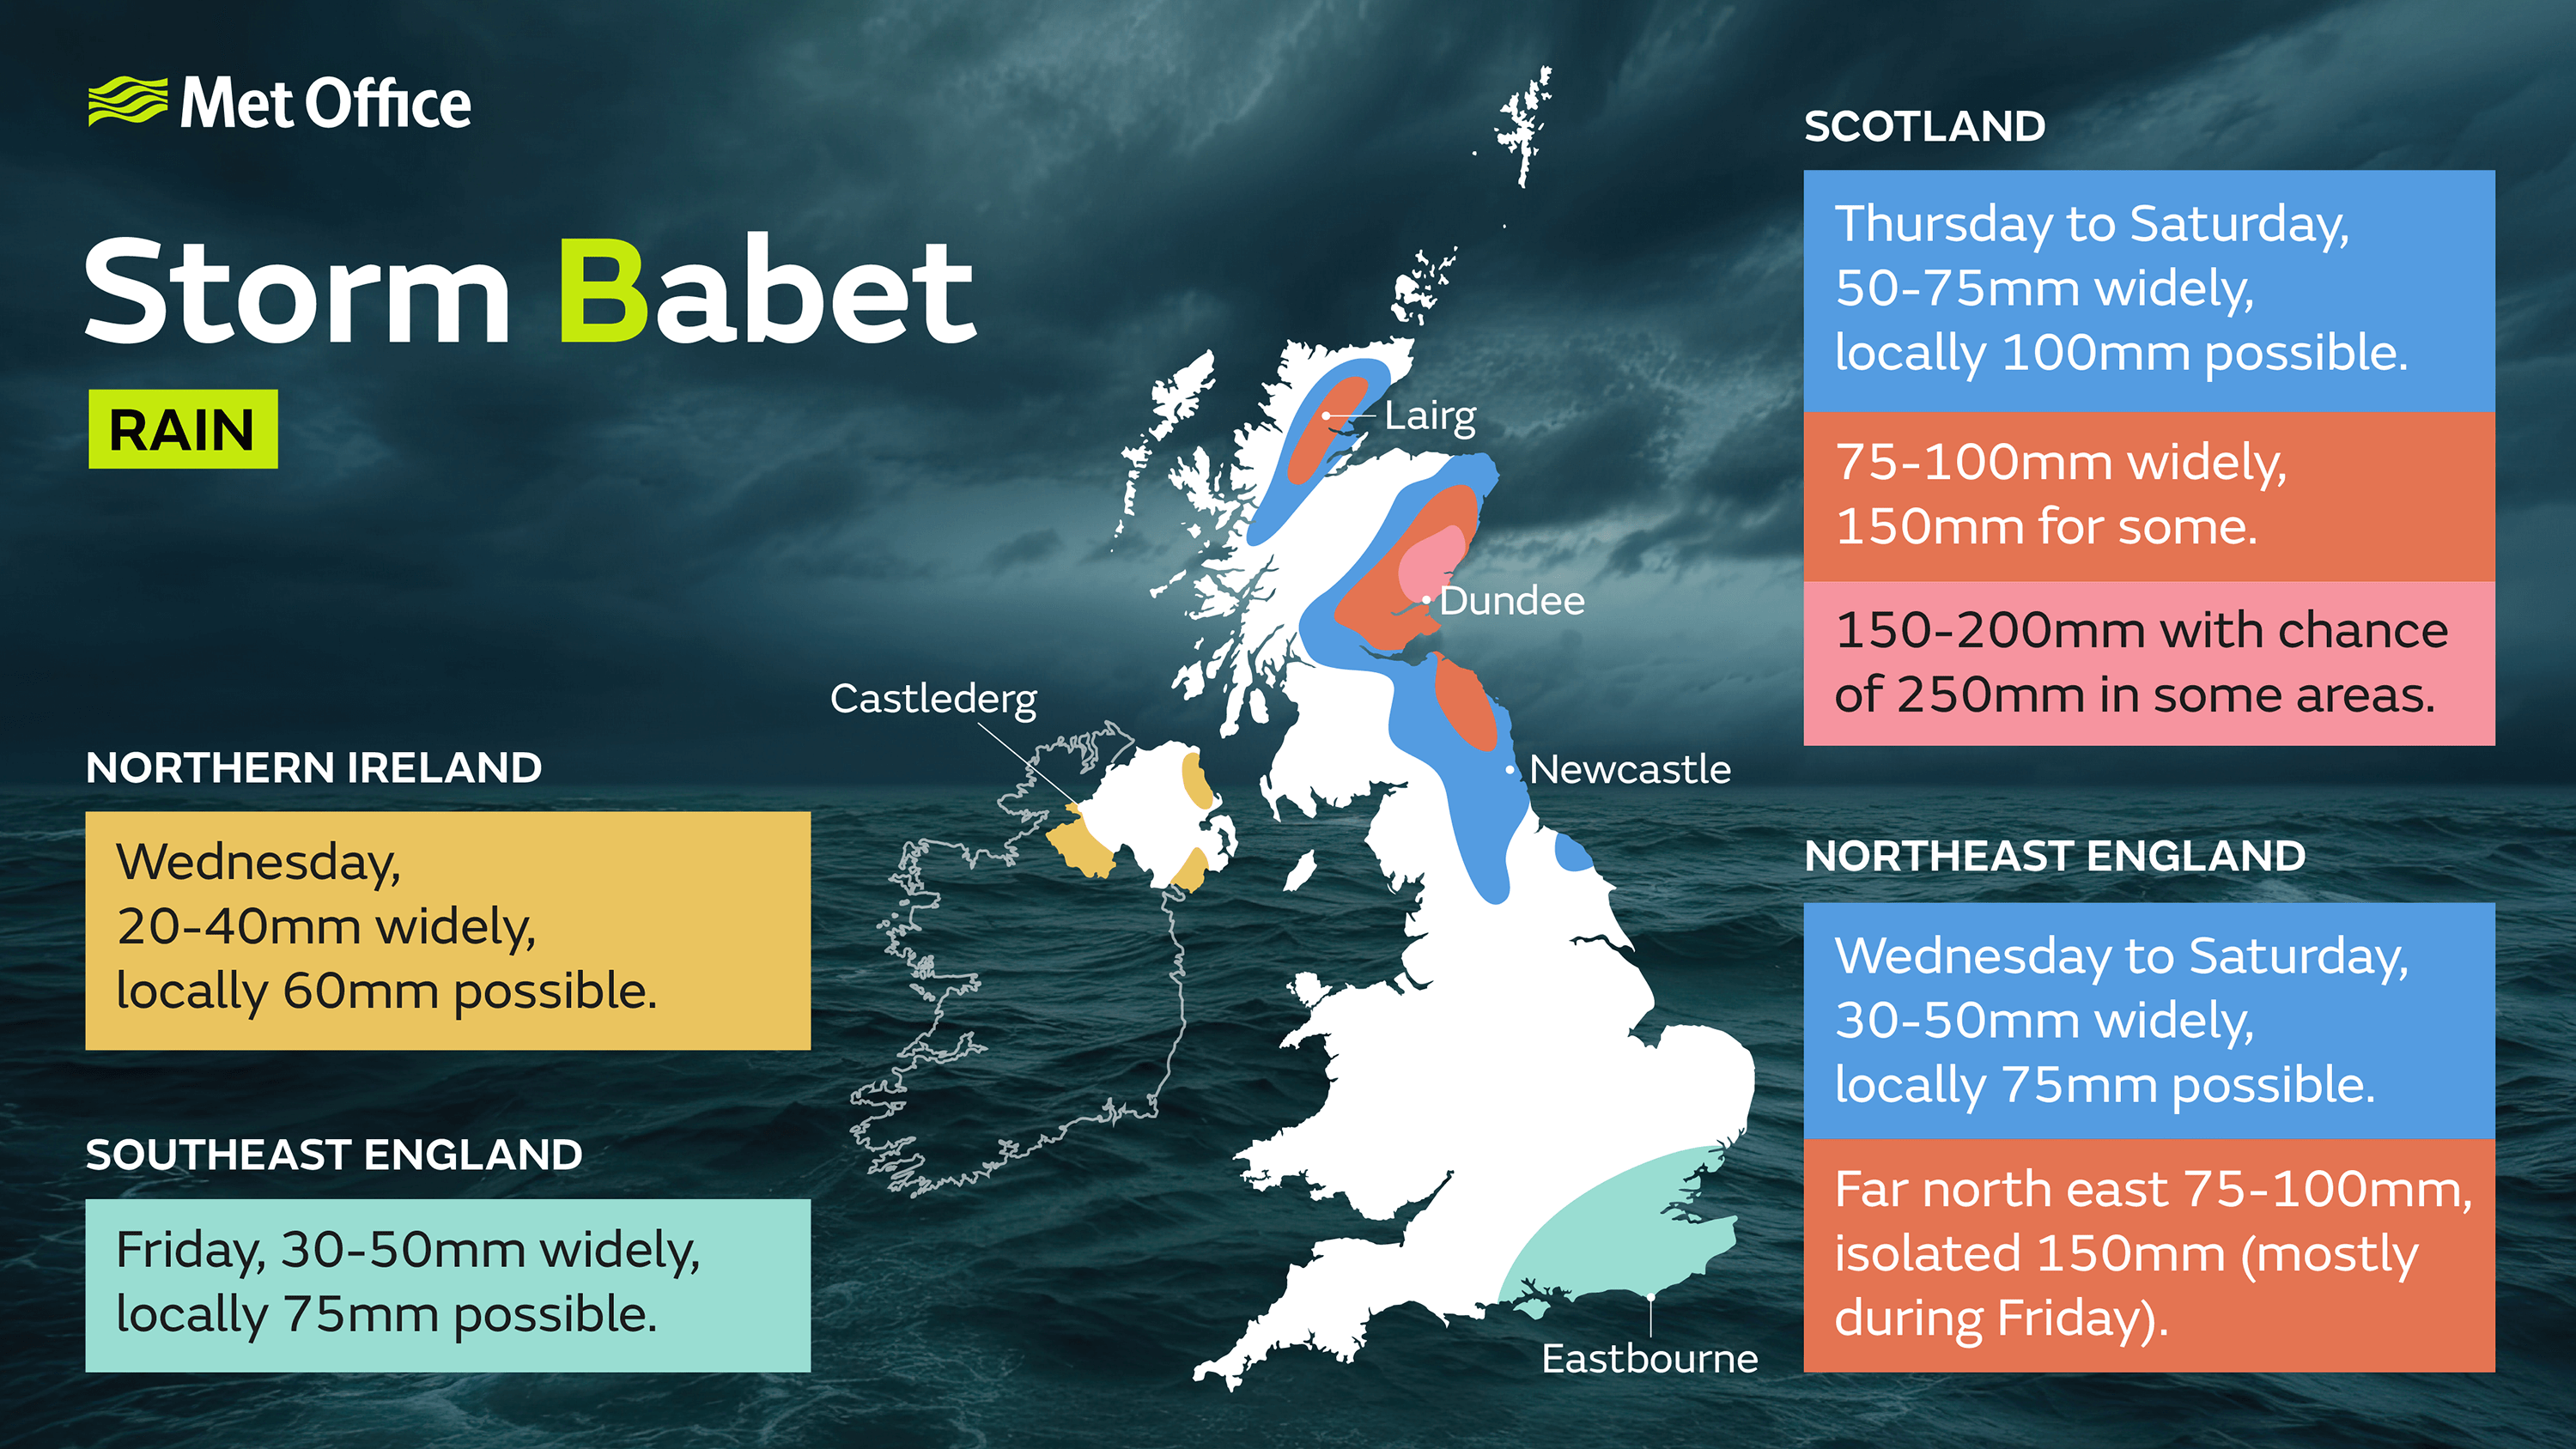 Storm Babet rainfall map. Northern Ireland: Wednesday, 20-40mm widely, locally 60mm possible. Scotland: Thursday to Saturday, 50-75mm widely, locally 100mm possible for E Scotland. 75-100m widely, 150mm of some in a more specific part of northern and eastern Scotland. 150-200mm with a chance of 250mm in some areas for an area to the north of Dundee. Northeast England: Wednesday to Saturday. 30-50mm widely, locally 75mm possible. Far north east, 75-100mm, isolated 150 (mostly during Friday). Southeast England: Friday, 30-50mm widely, locally 75mm possible.